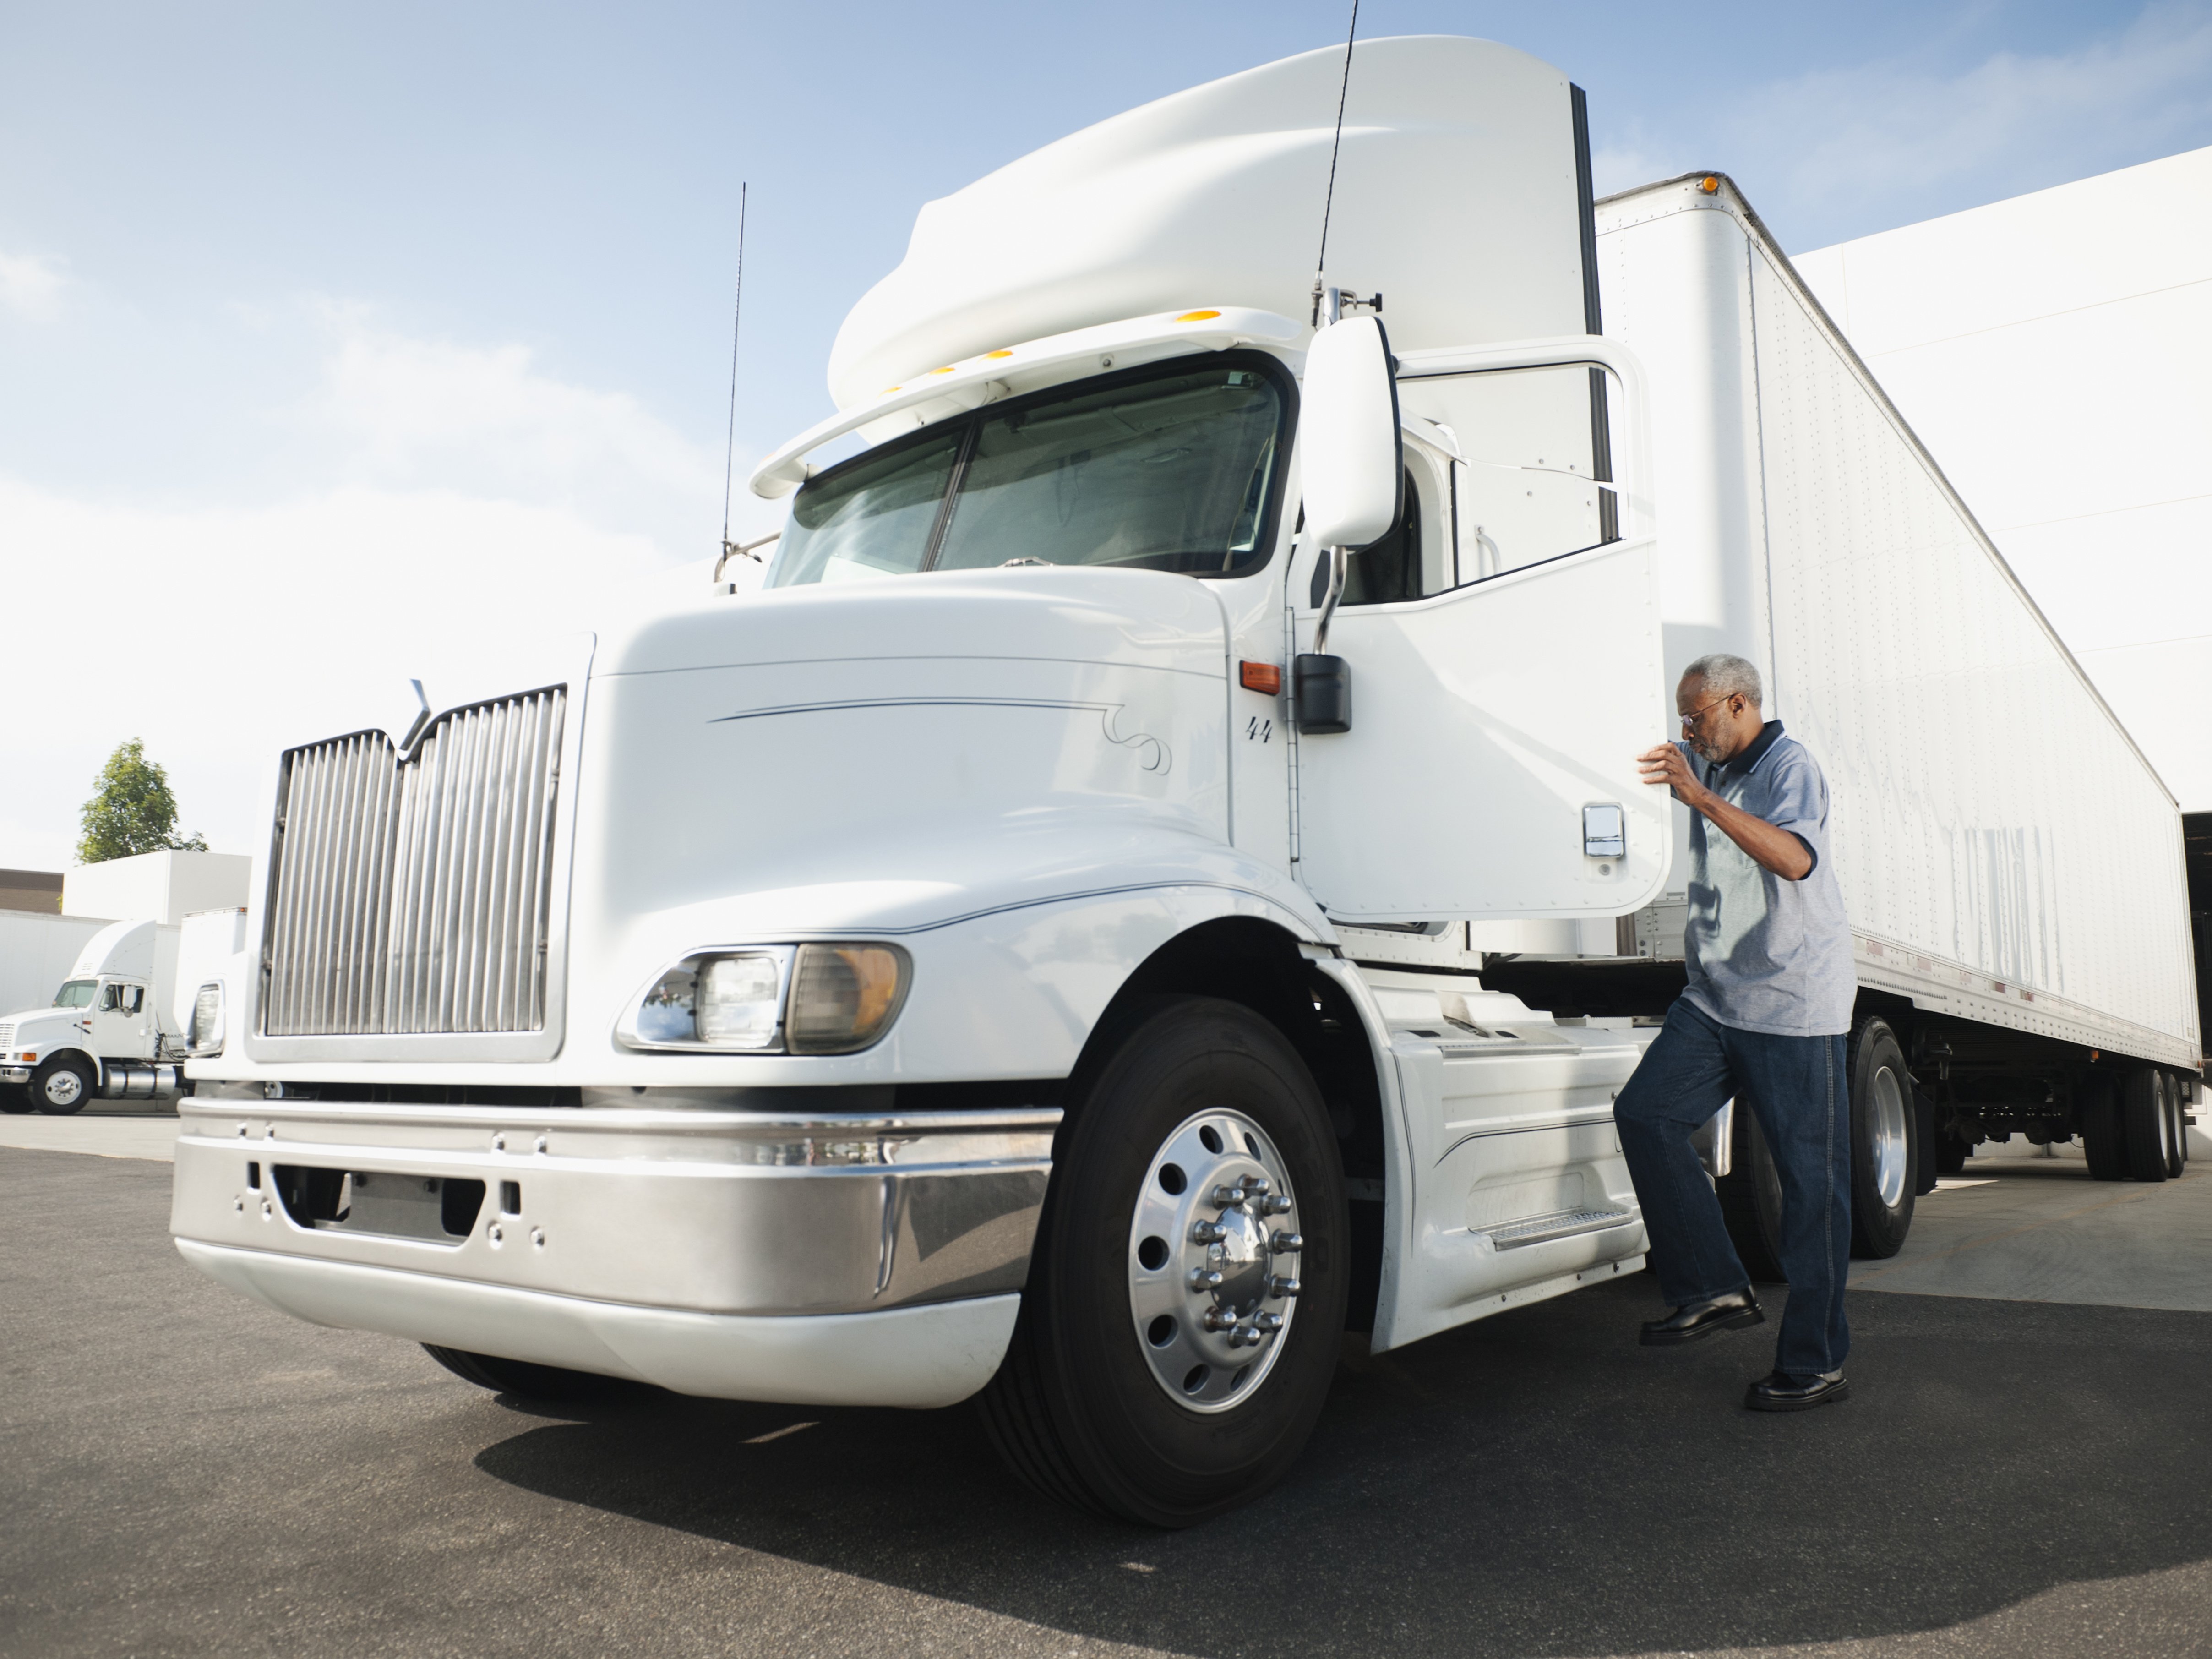 Trucking Workforce: The Pros & Cons of 1099 Contractors vs. Employees